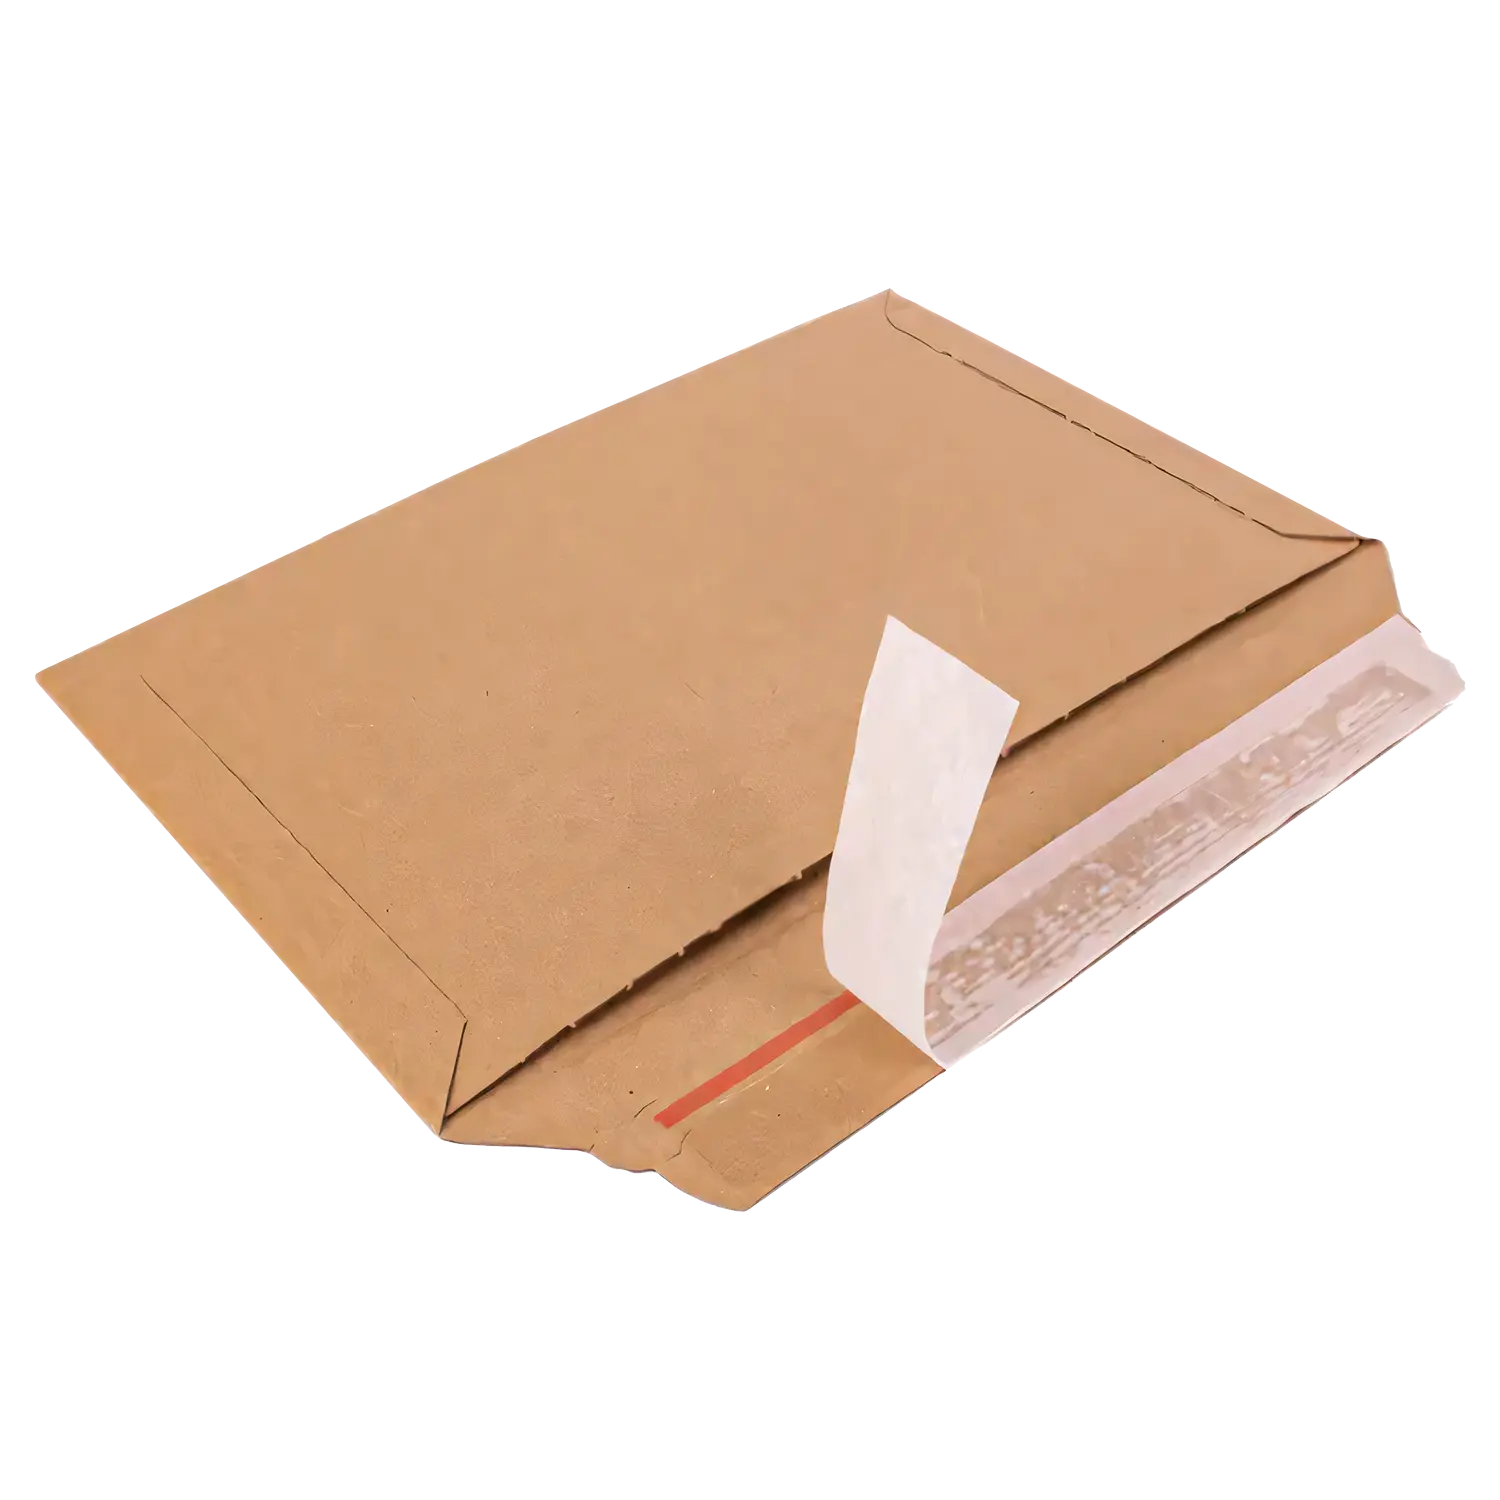 Expandable Cardboard Envelopes - 13.11x9.17 Inch